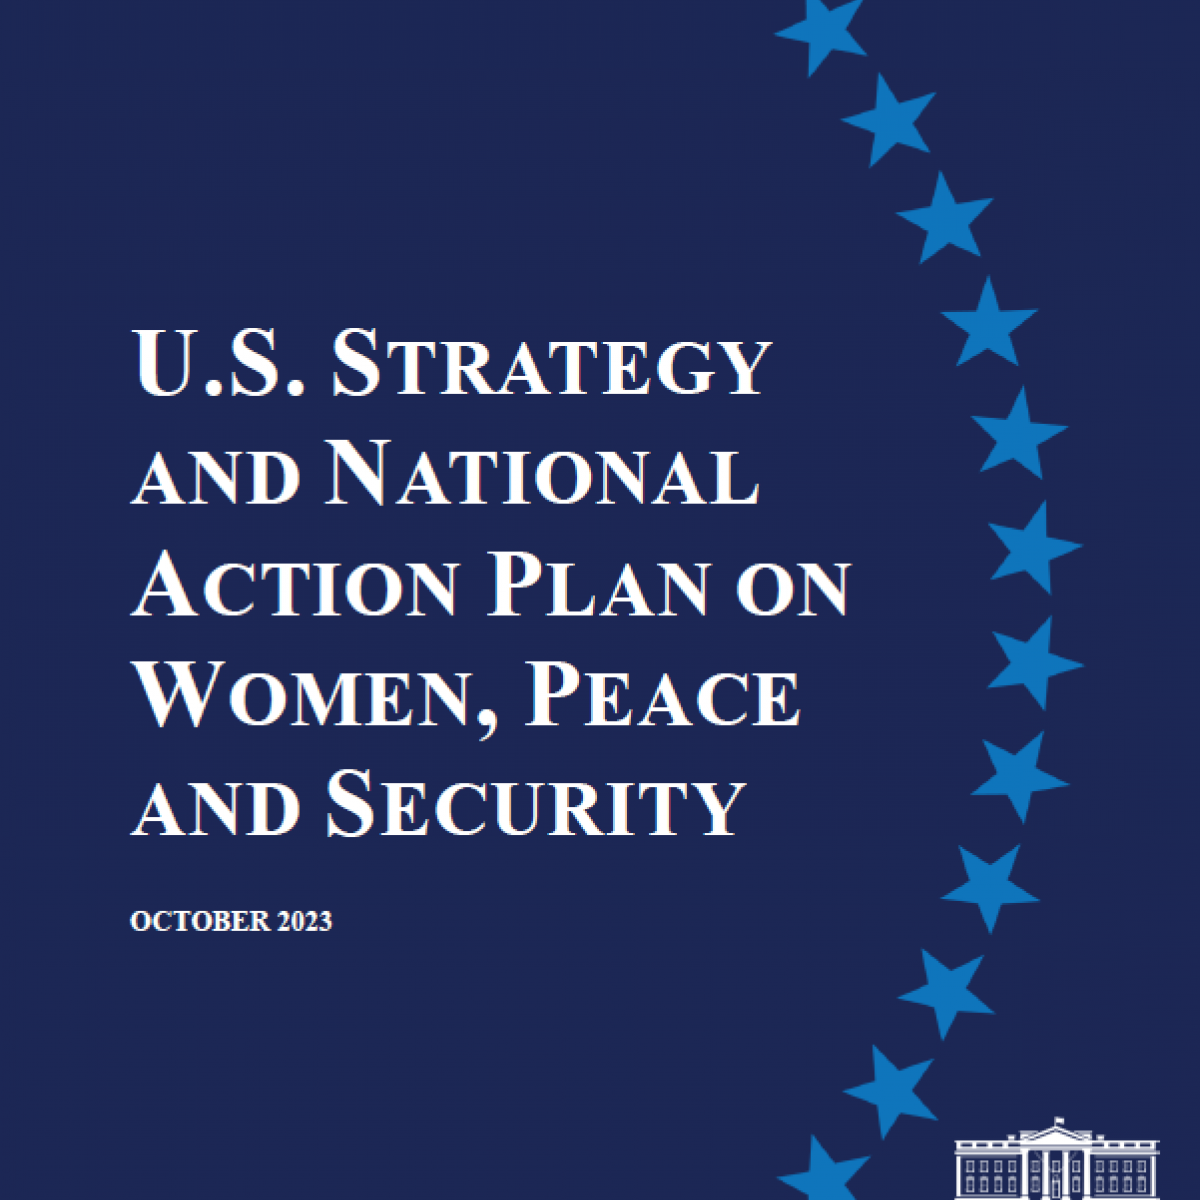 U.S. Strategy And National Action Plan On Women, Peace And Security